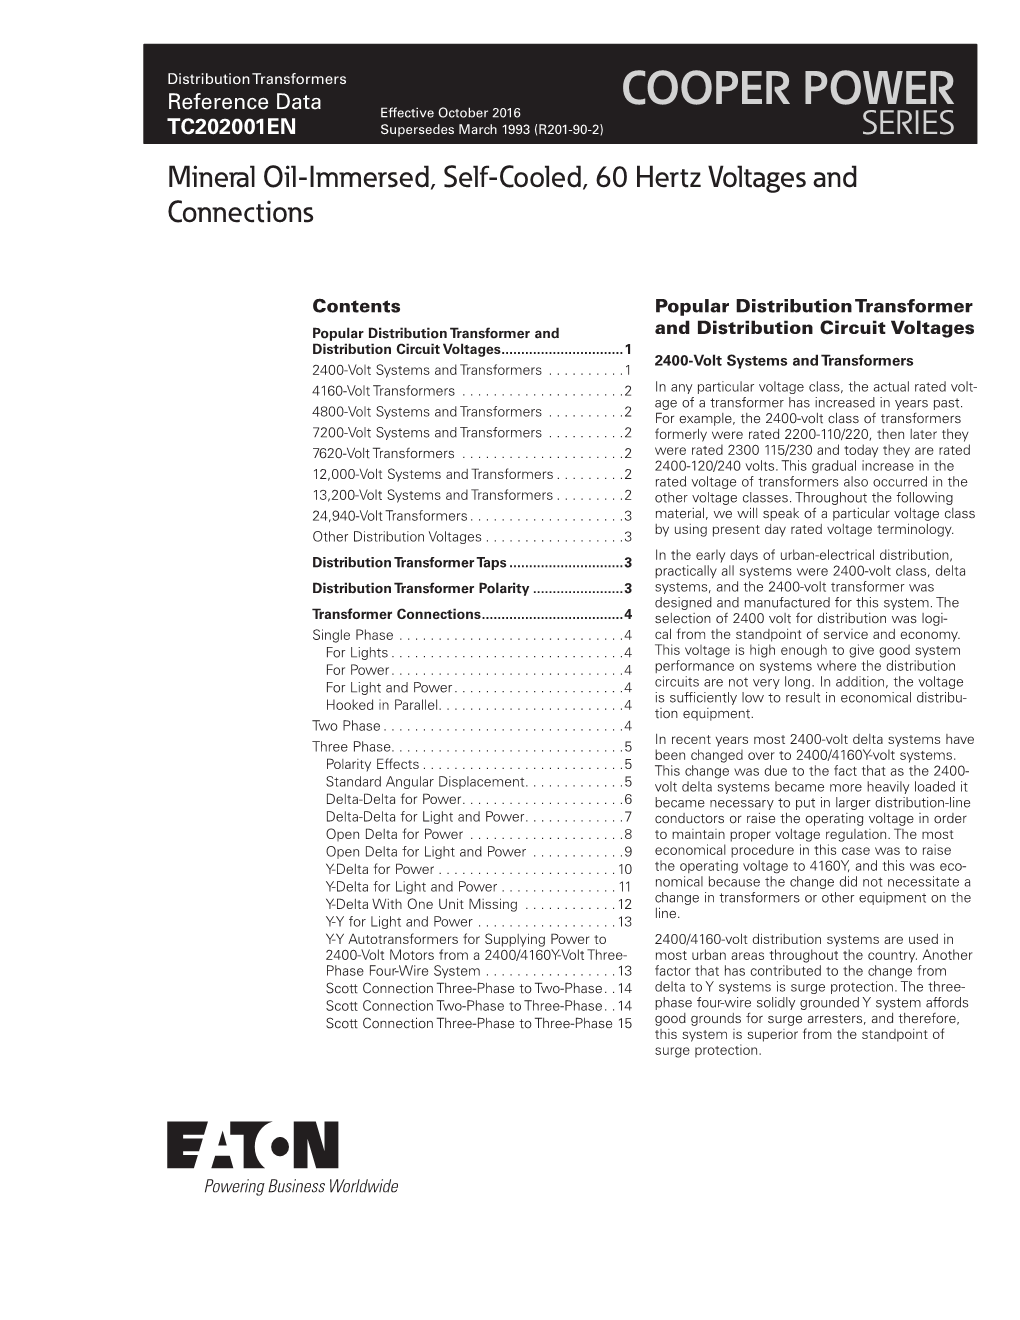 Distribution Transformers Mineral Oil-Immersed, Self-Cooled, 60 Hertz Voltages and Connections Information